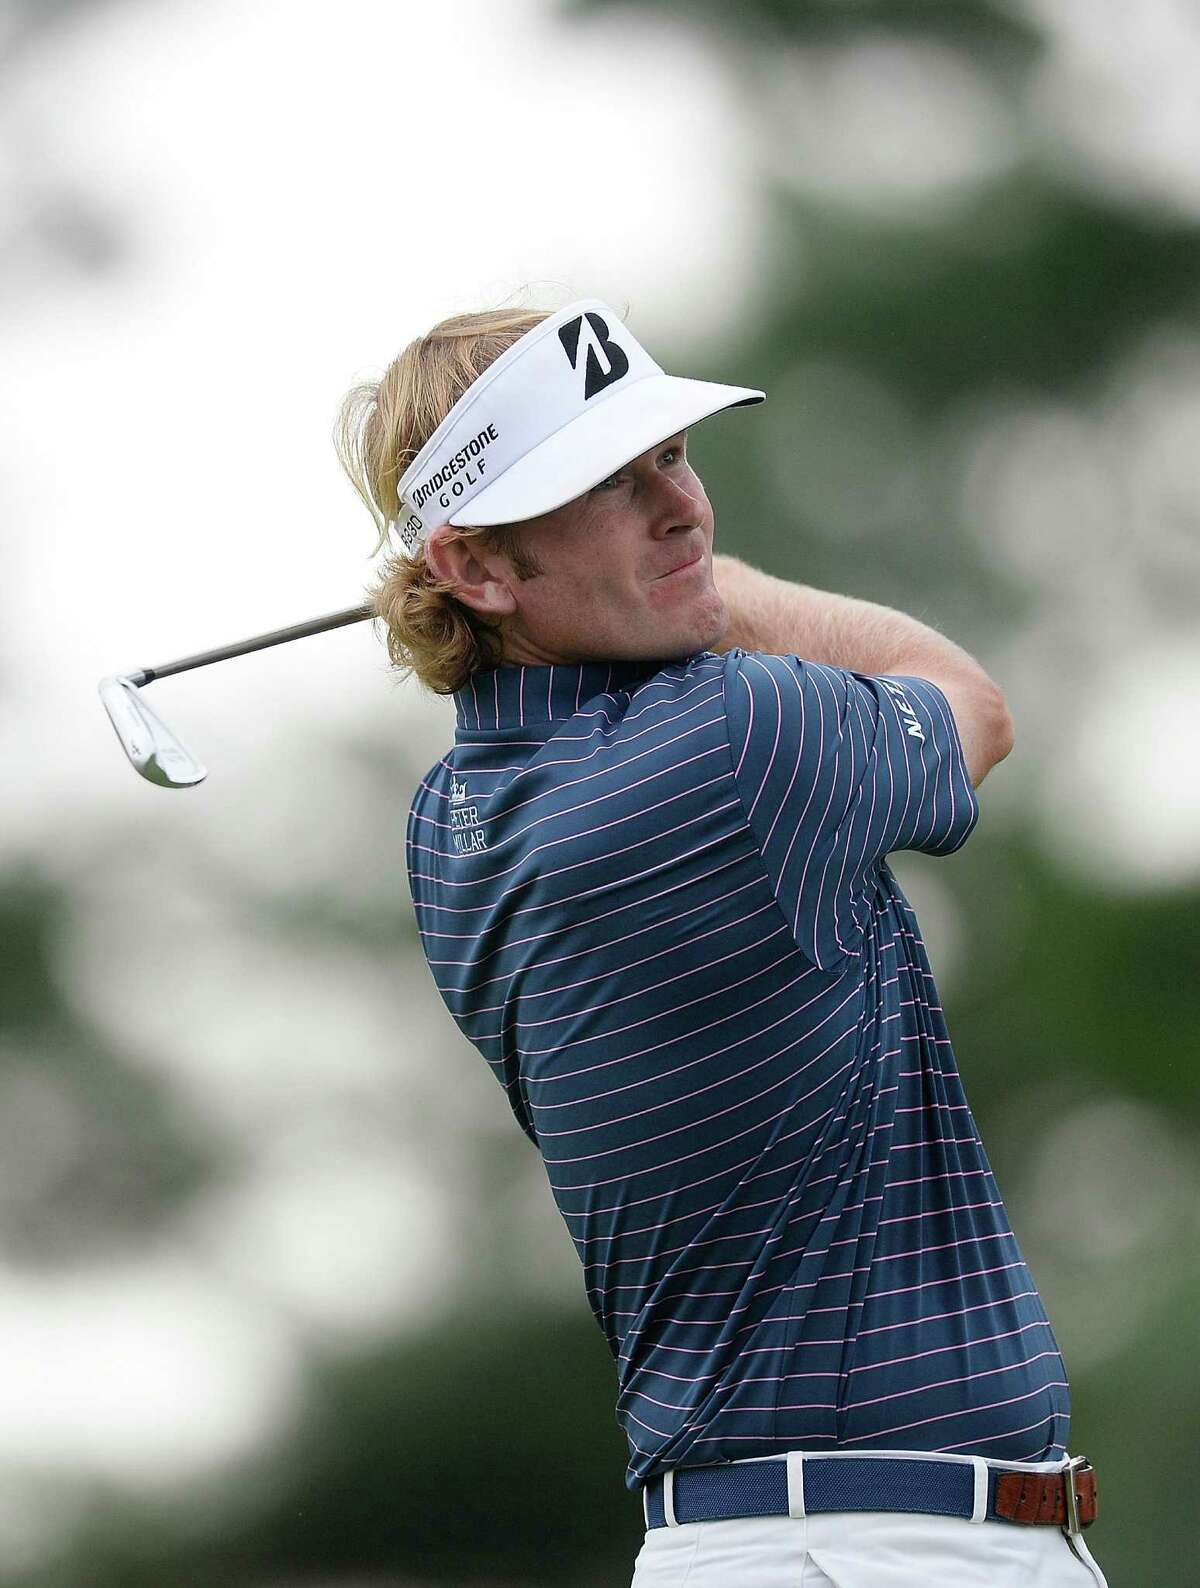 If Brandt Snedeker can stay straight off the tee, he stands to have a shot at winning.